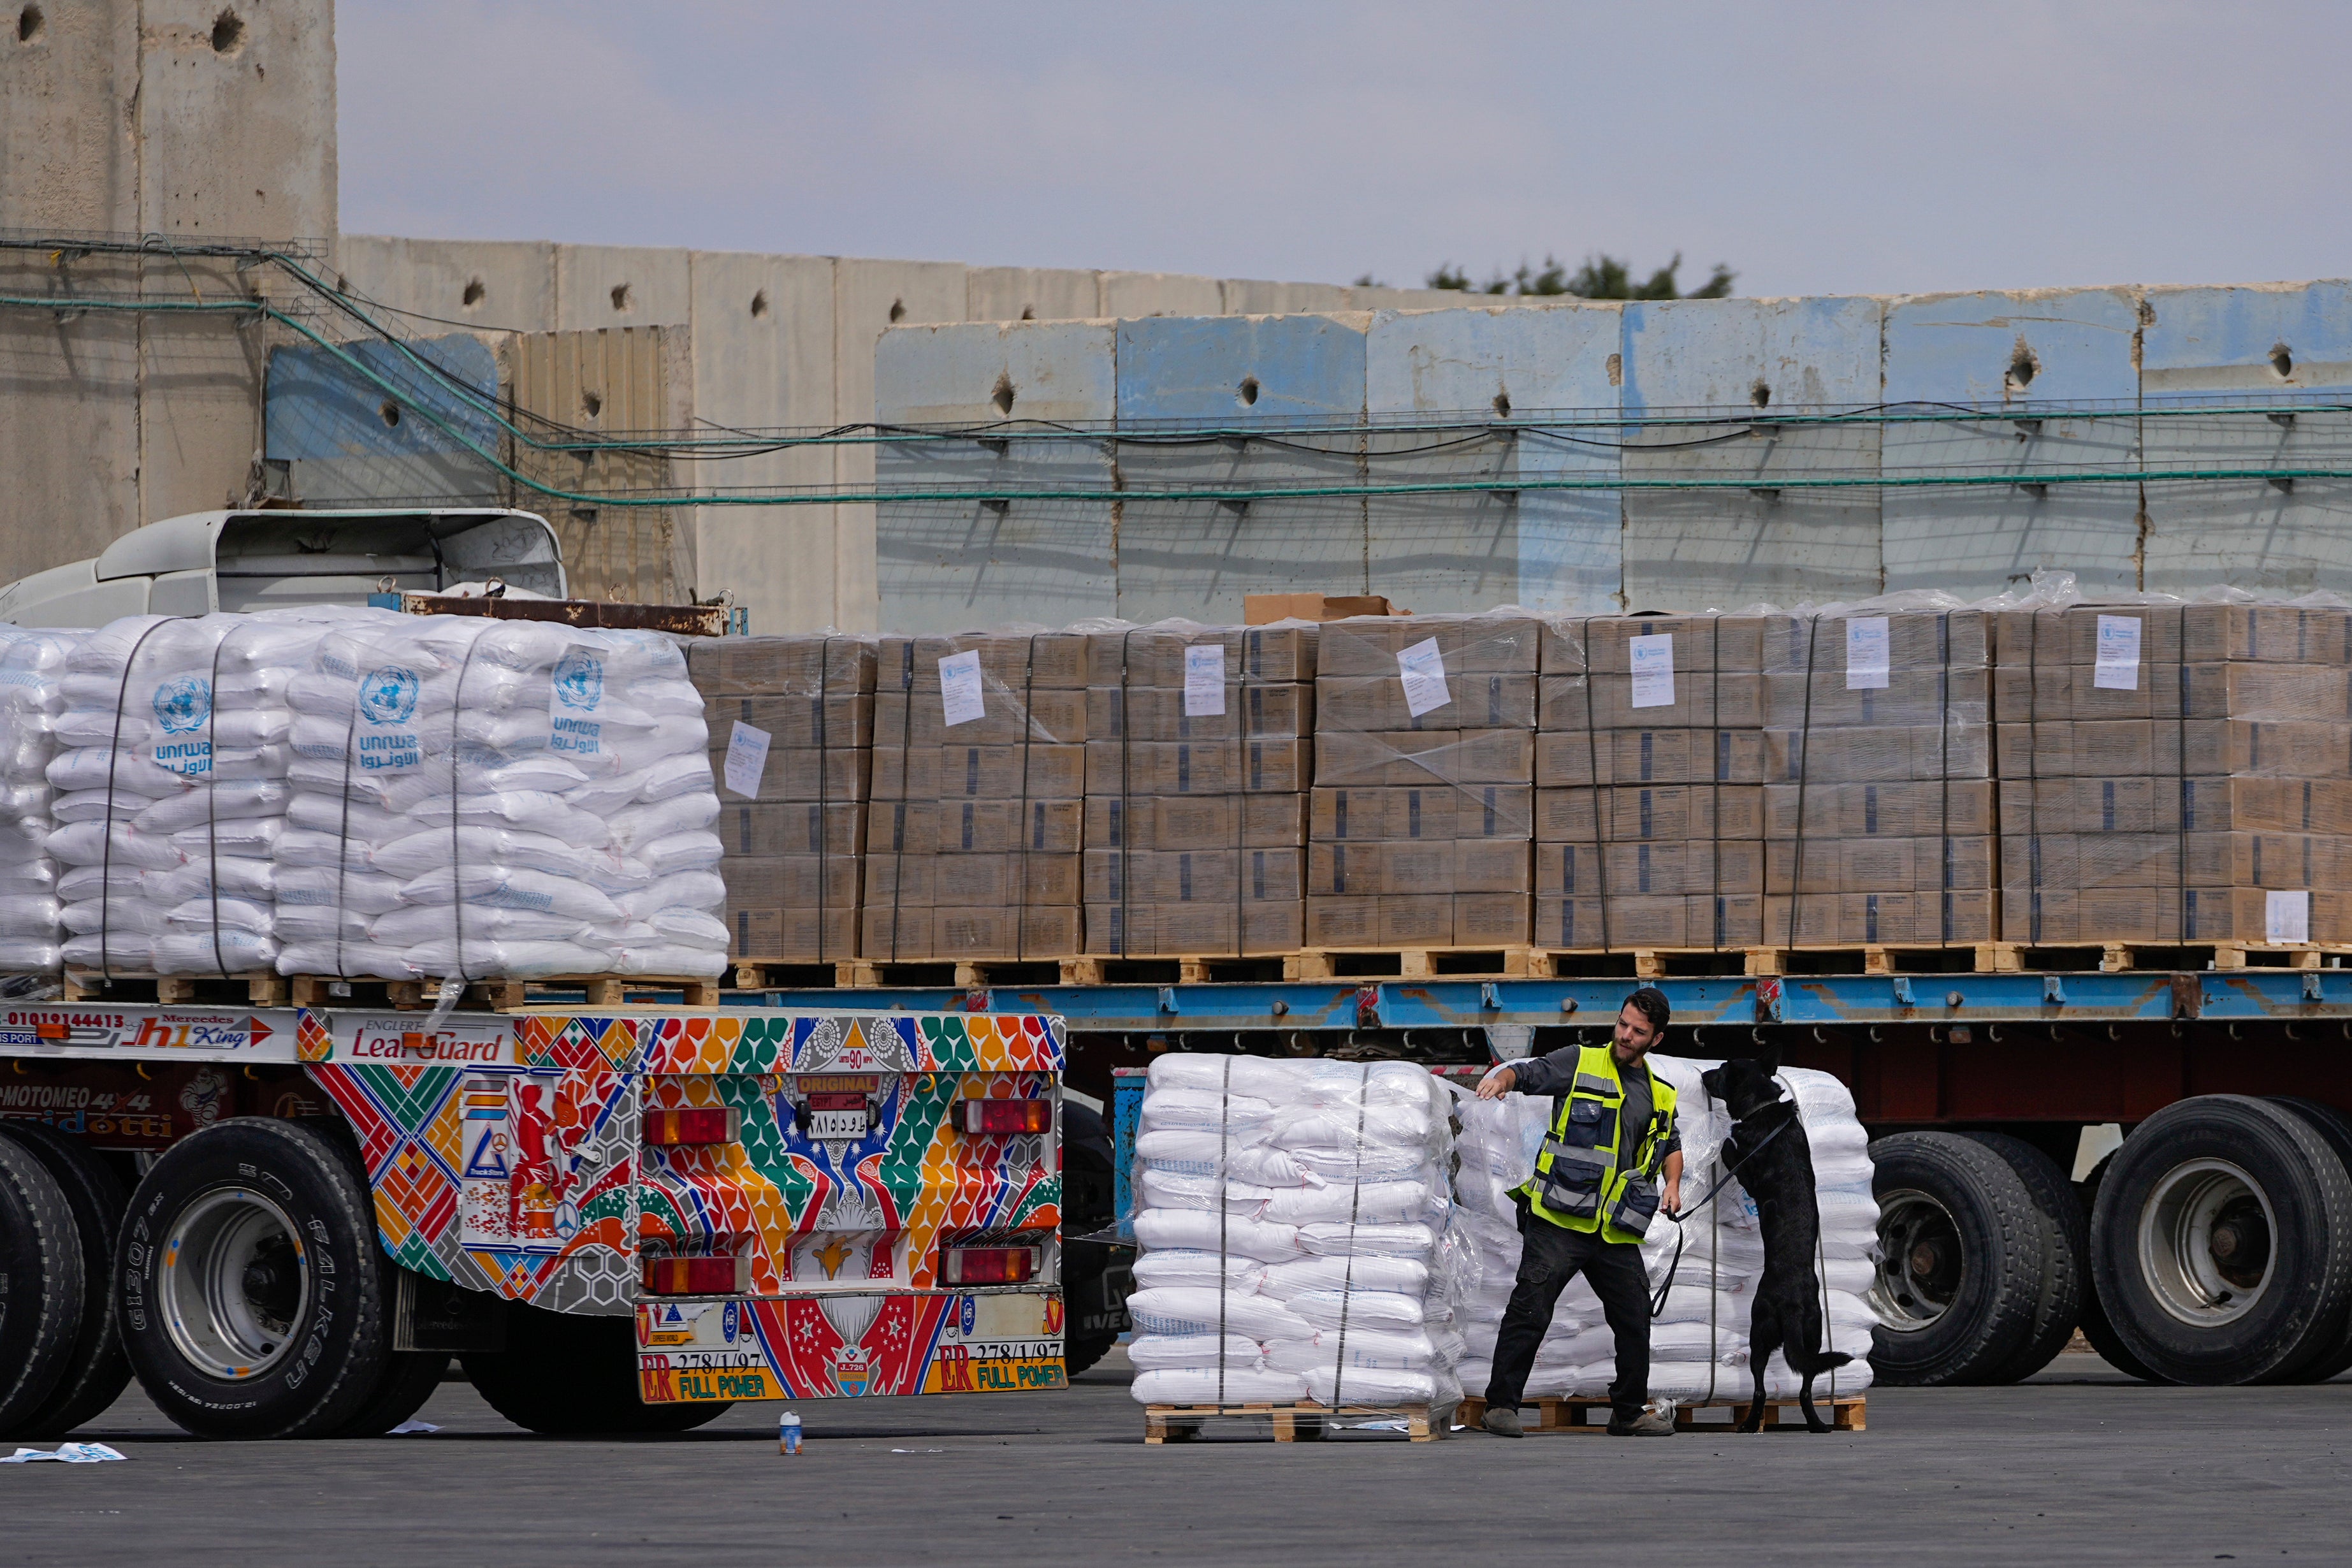 Trucks carrying humanitarian aid for the Gaza Strip pass through the inspection area at the Kerem Shalom Crossing